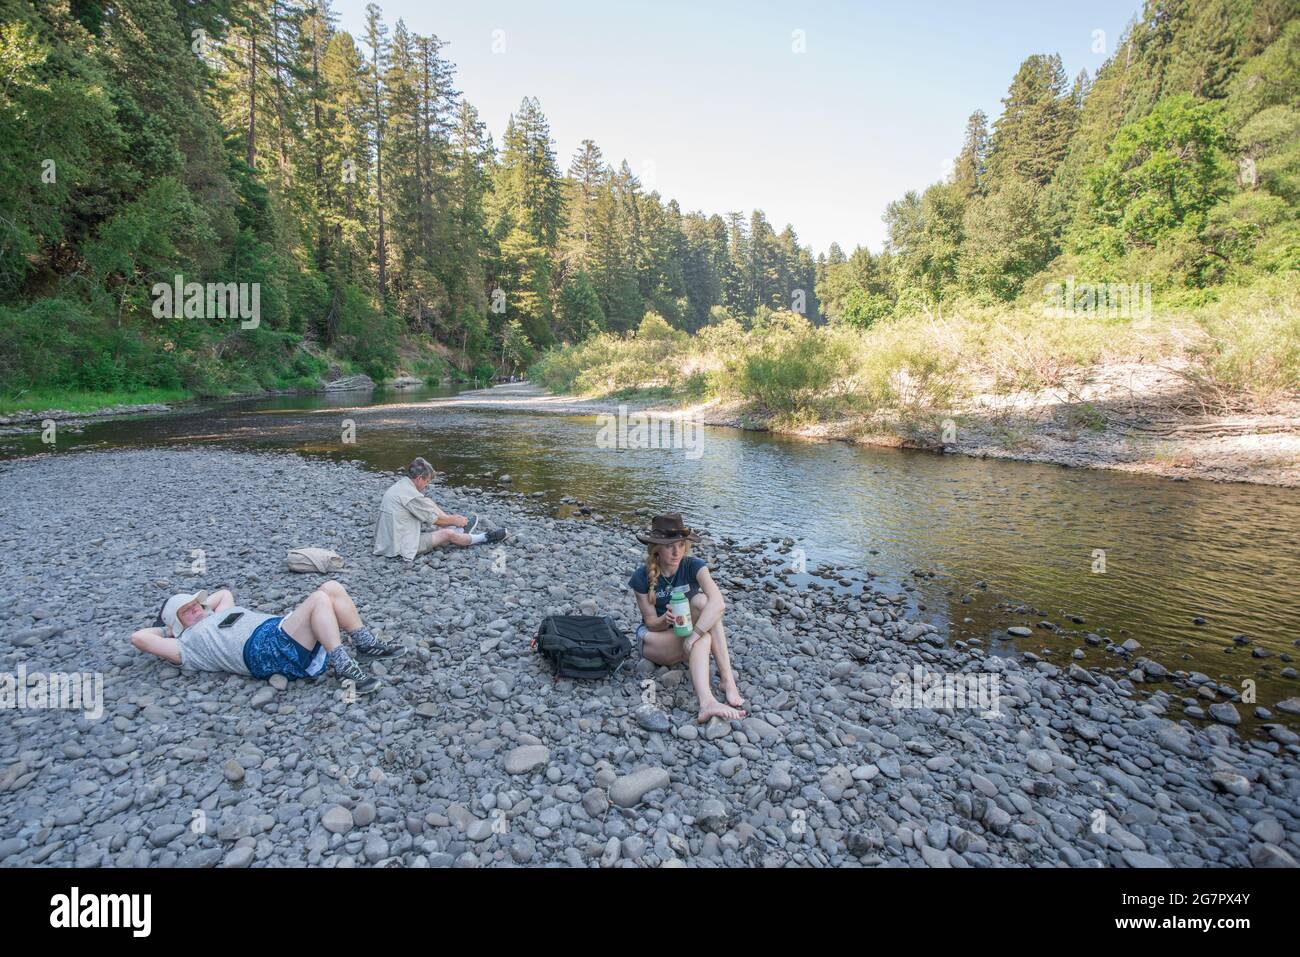 A family rests along the river in humboldt redwoods state park surrounded by endangered redwood trees (Sequoia sempervirens) in Northern California. Stock Photo